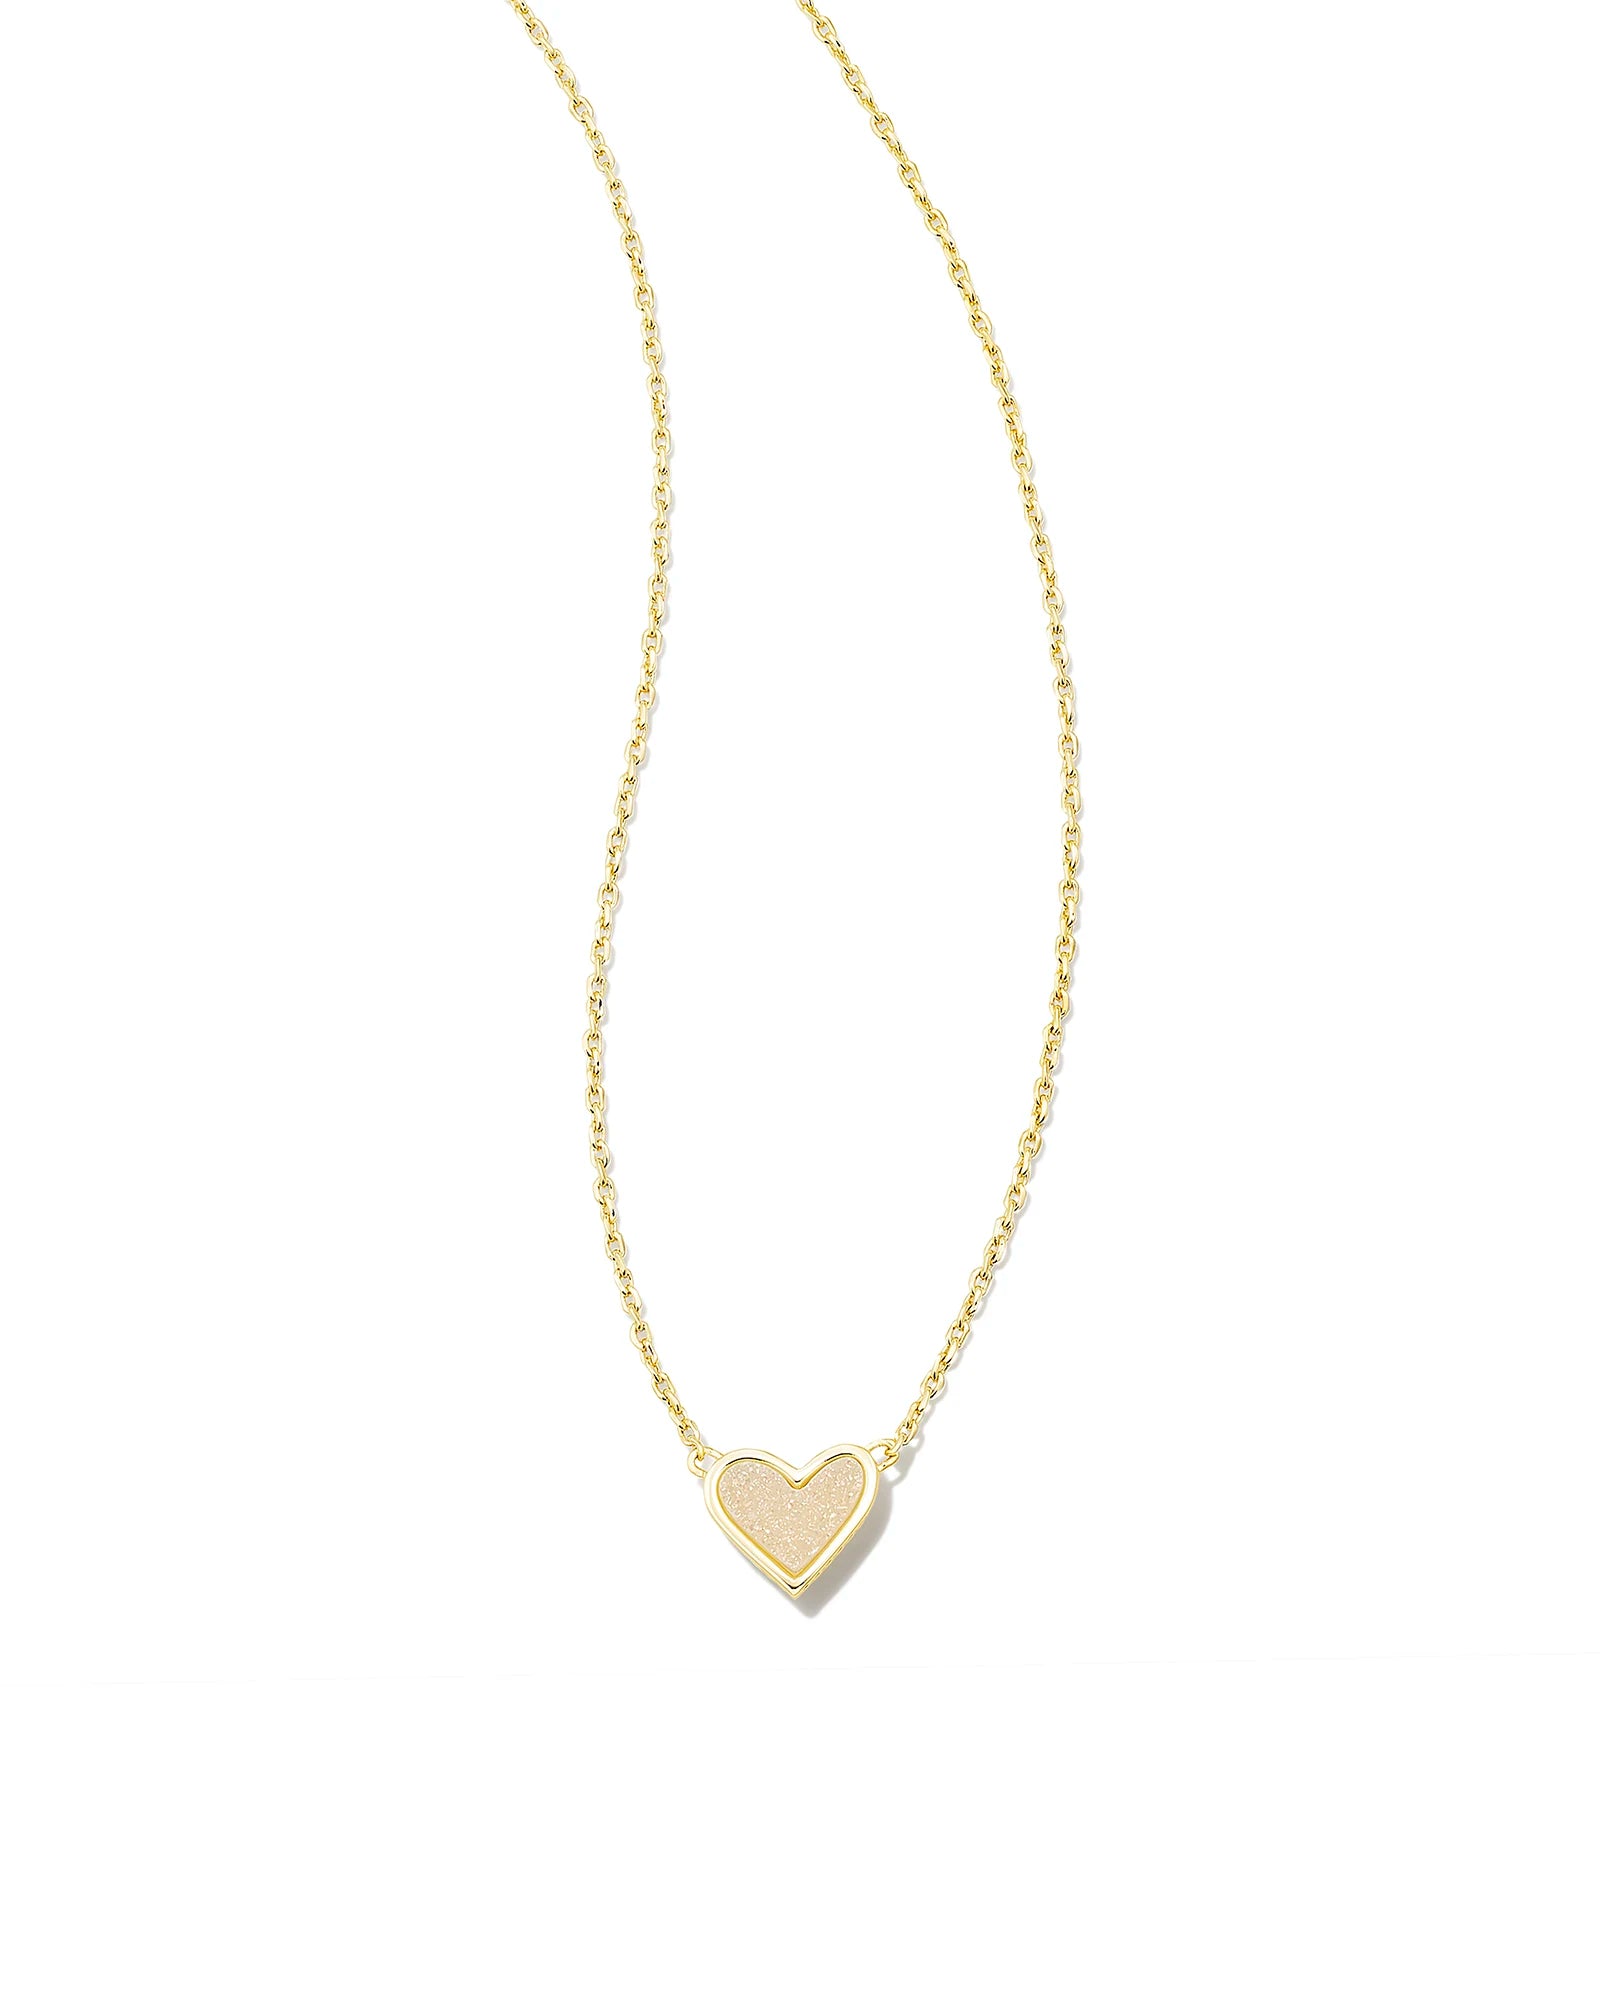 Kendra Scott Framed Ari Heart Short Pendant Necklace Gold Iridescent Drusy-Necklaces-Kendra Scott-N00347GLD-The Twisted Chandelier